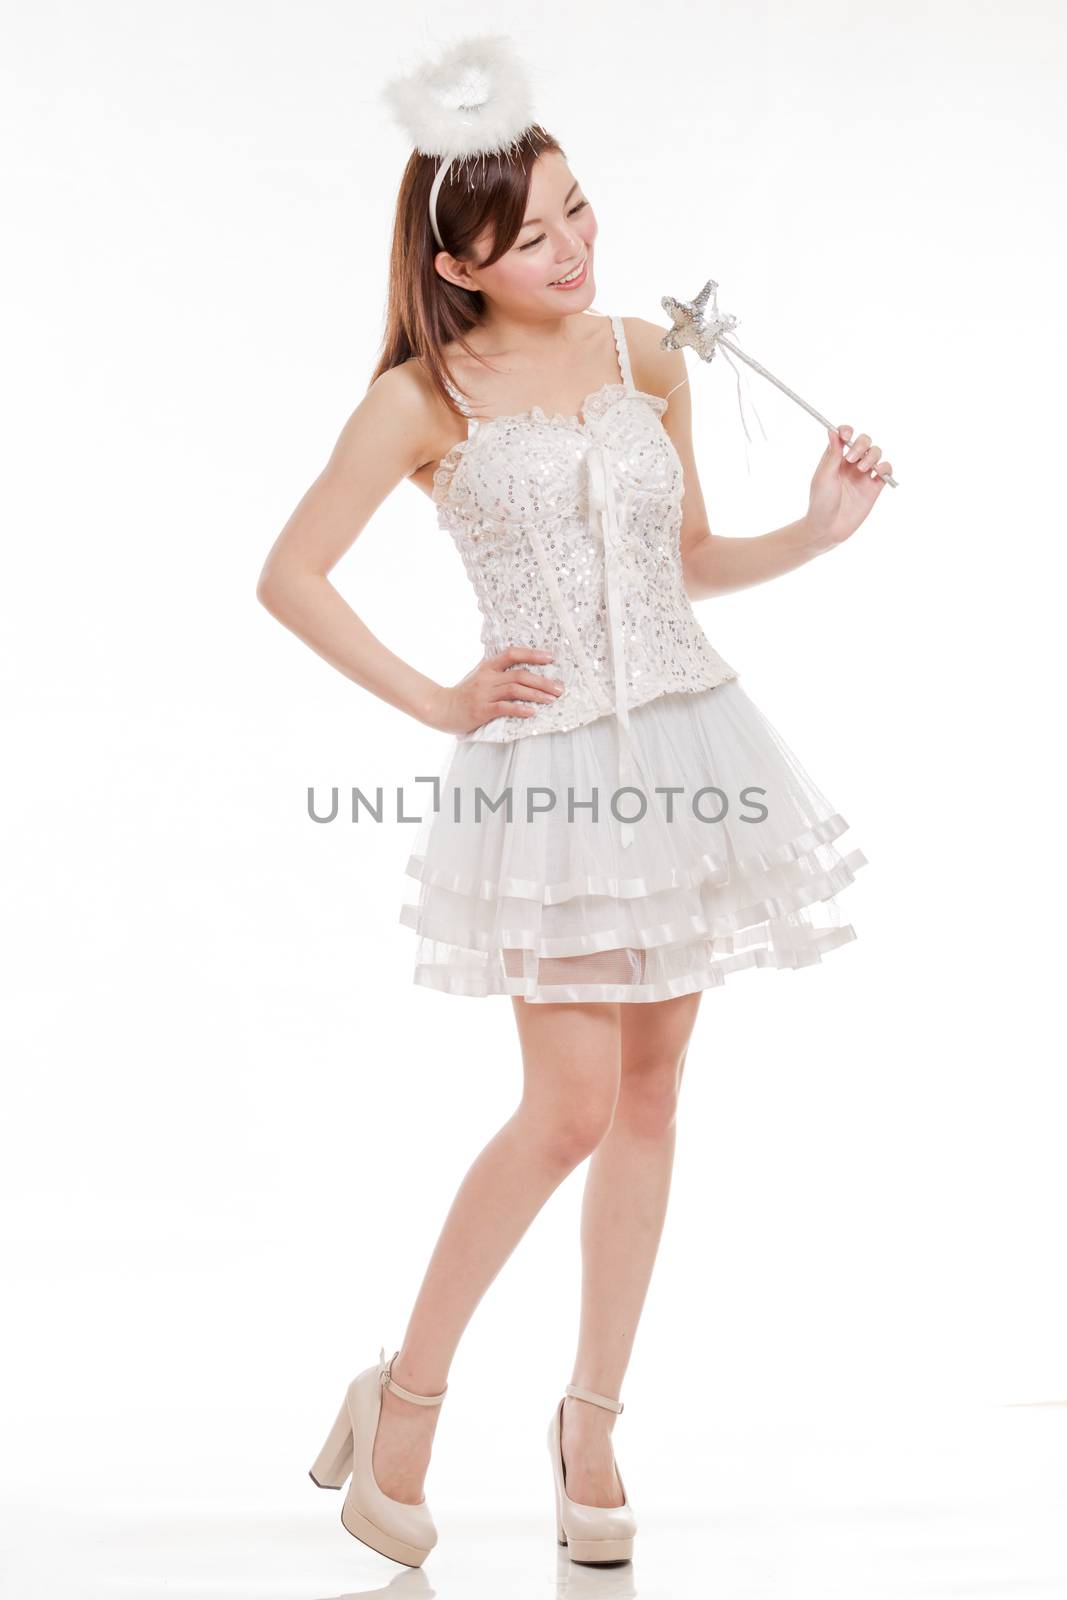 Malay woman in white angel fairy costume with wand